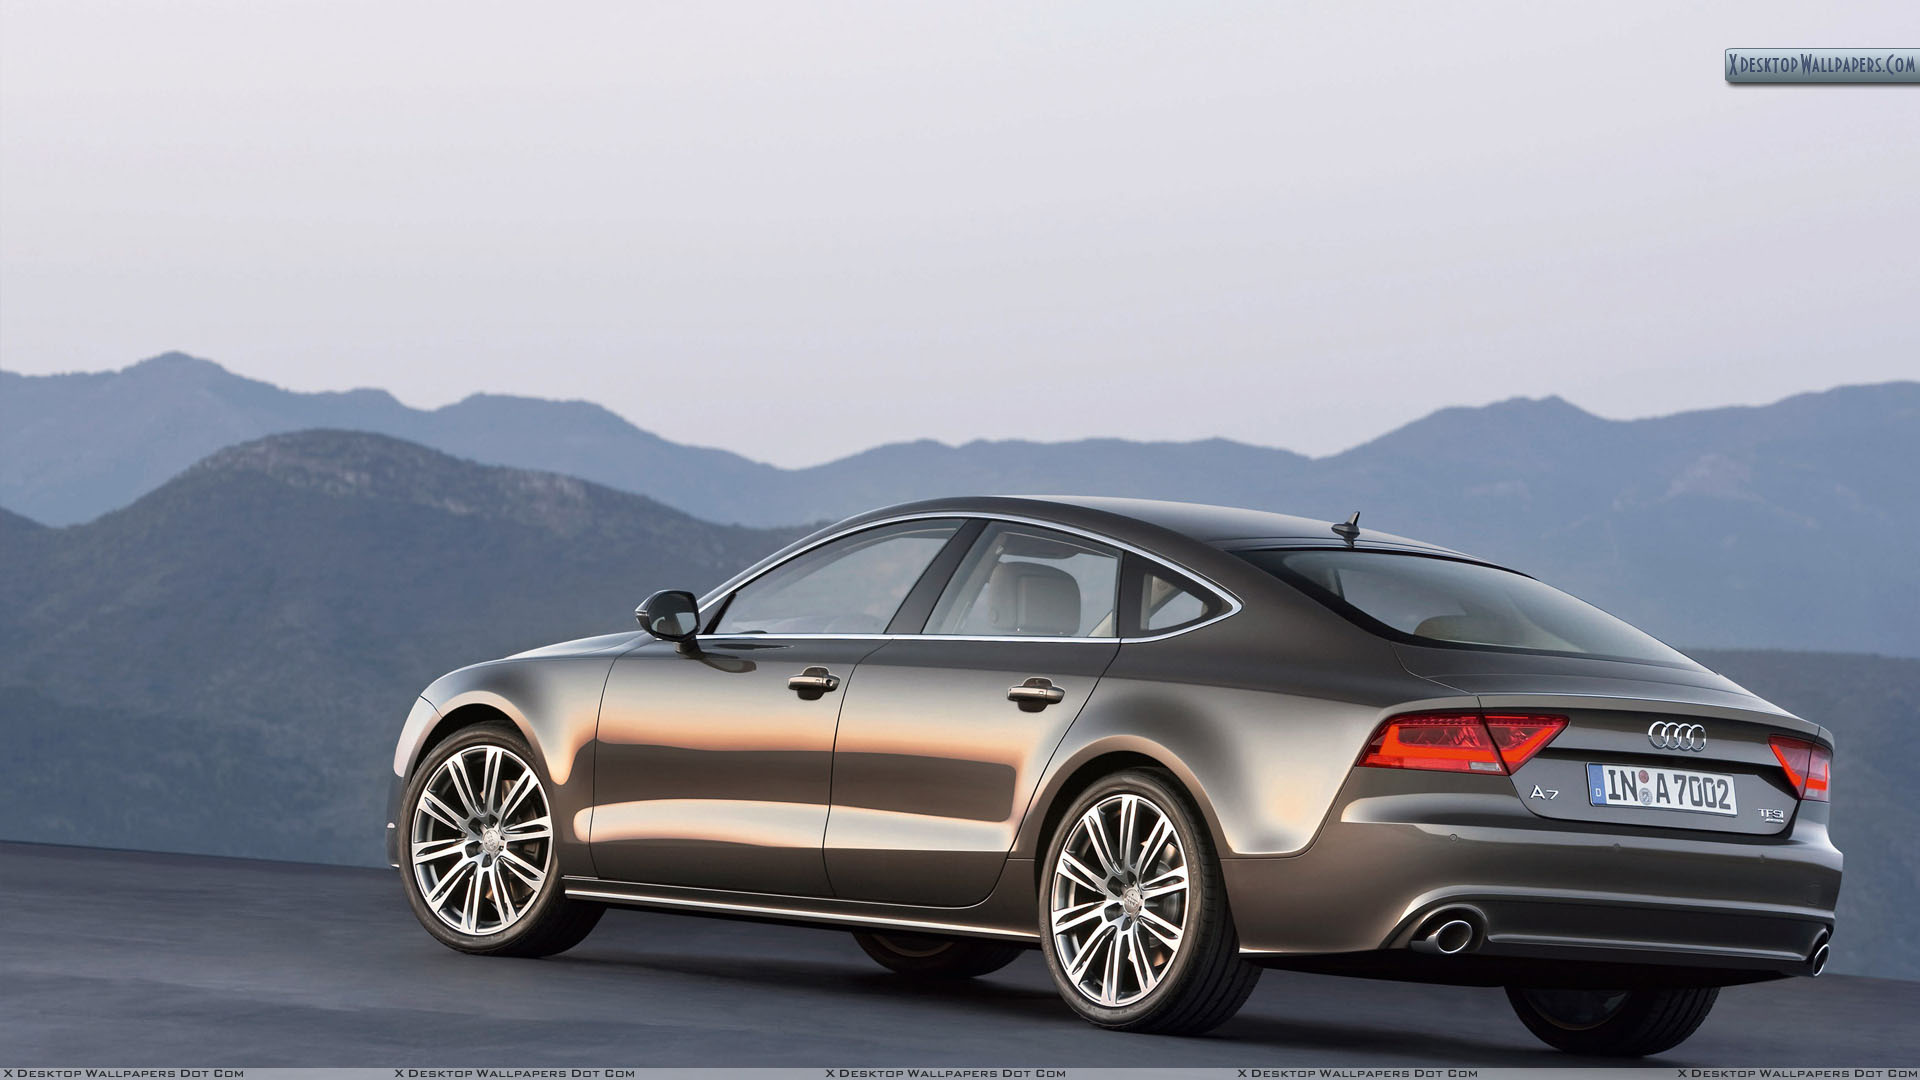 Audi A7 Wallpaper Photos Image In HD